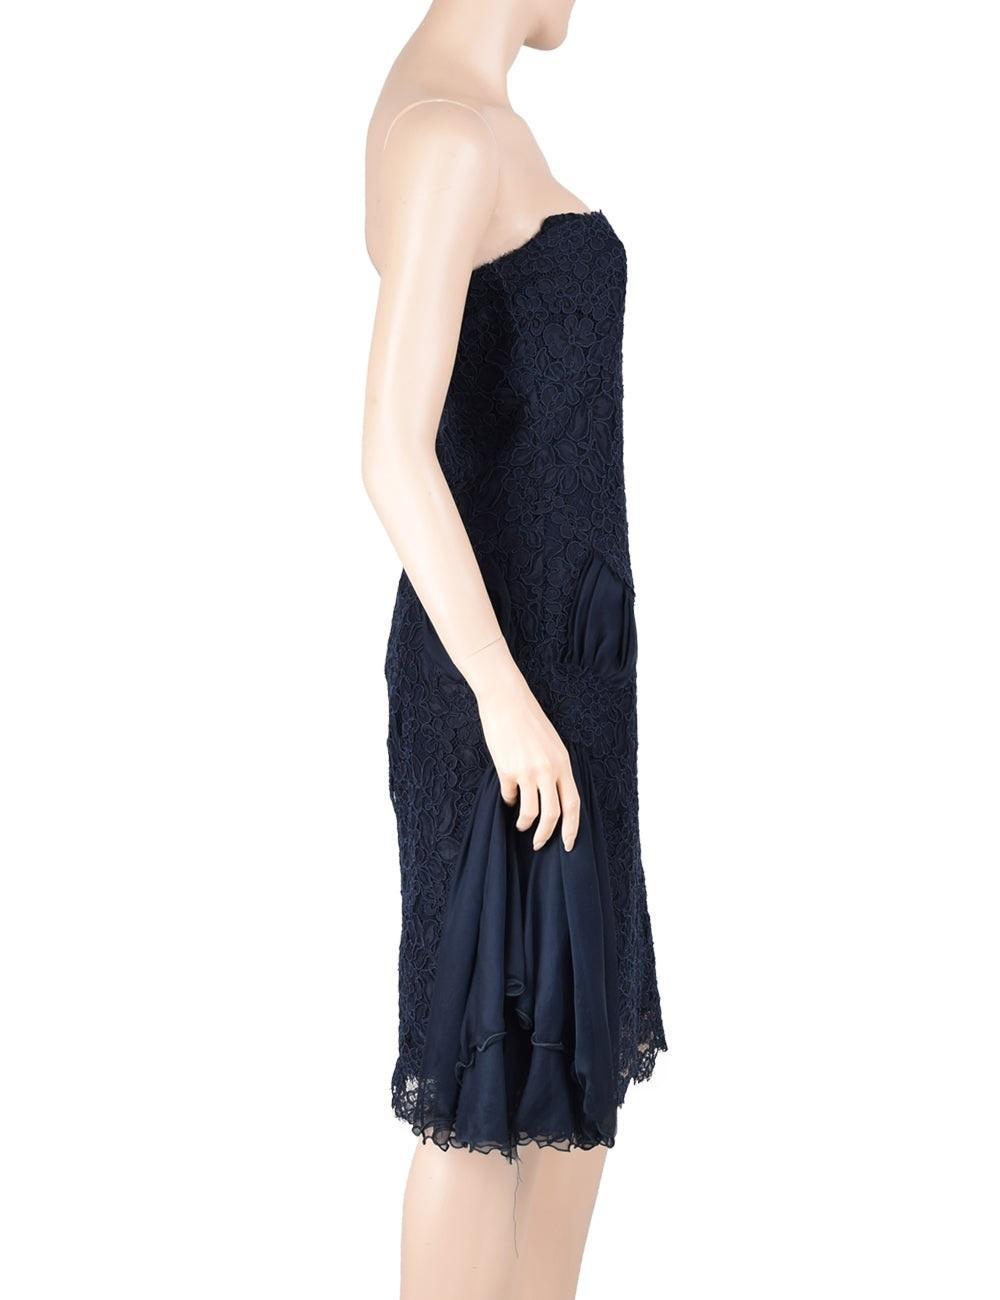 Valentino Navy lace midi dress.

Additional information:
Material: Polyester 
Features: Lace detailing
Size: US 8 
Overall Condition: Gently used
Note: Minimum threading